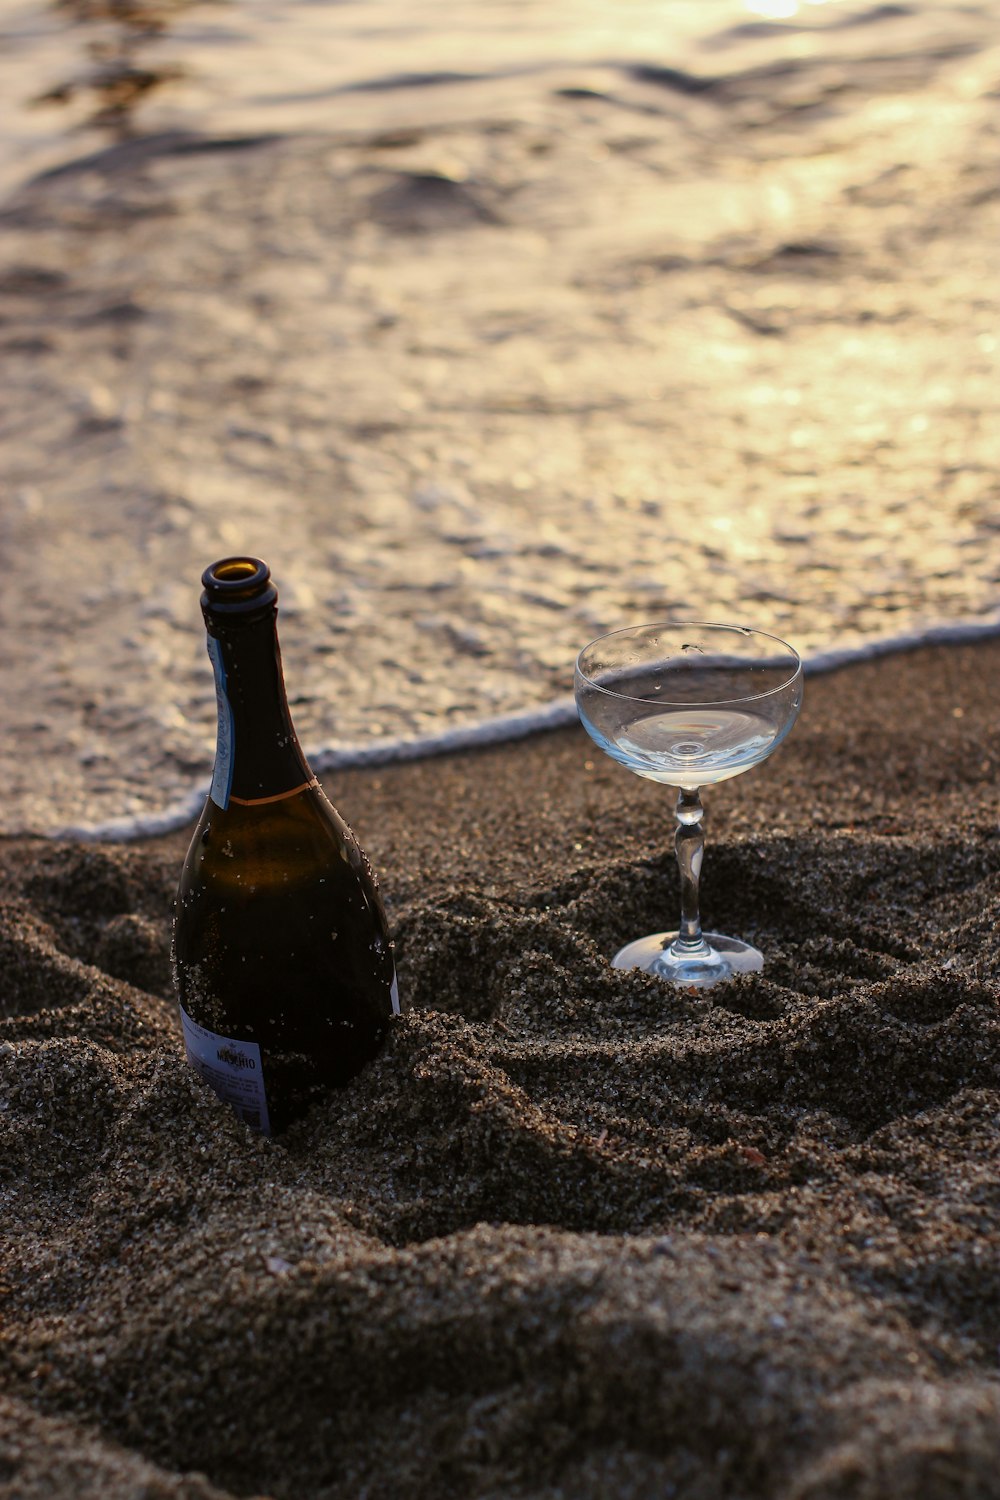 black glass bottle beside clear wine glass on brown sand during daytime